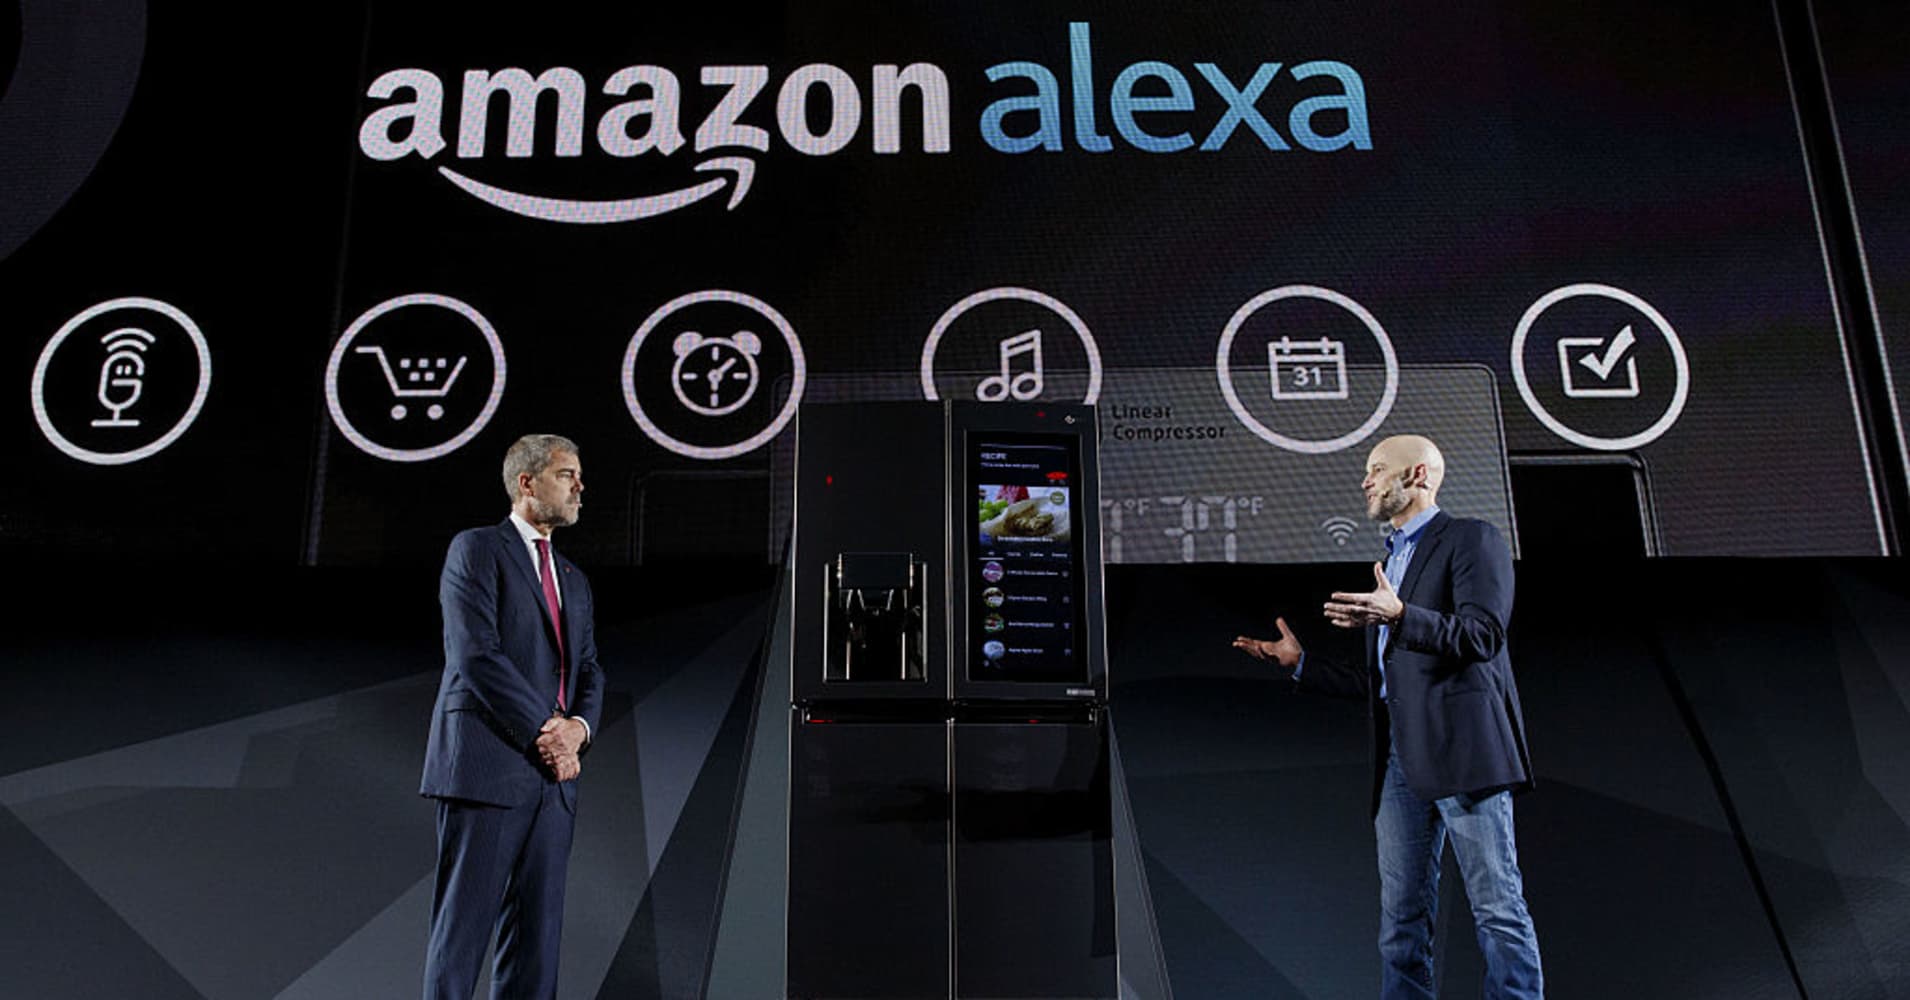 Amazon plans to release at least 8 new Alexa devices, including a microwave oven and in-car gadget